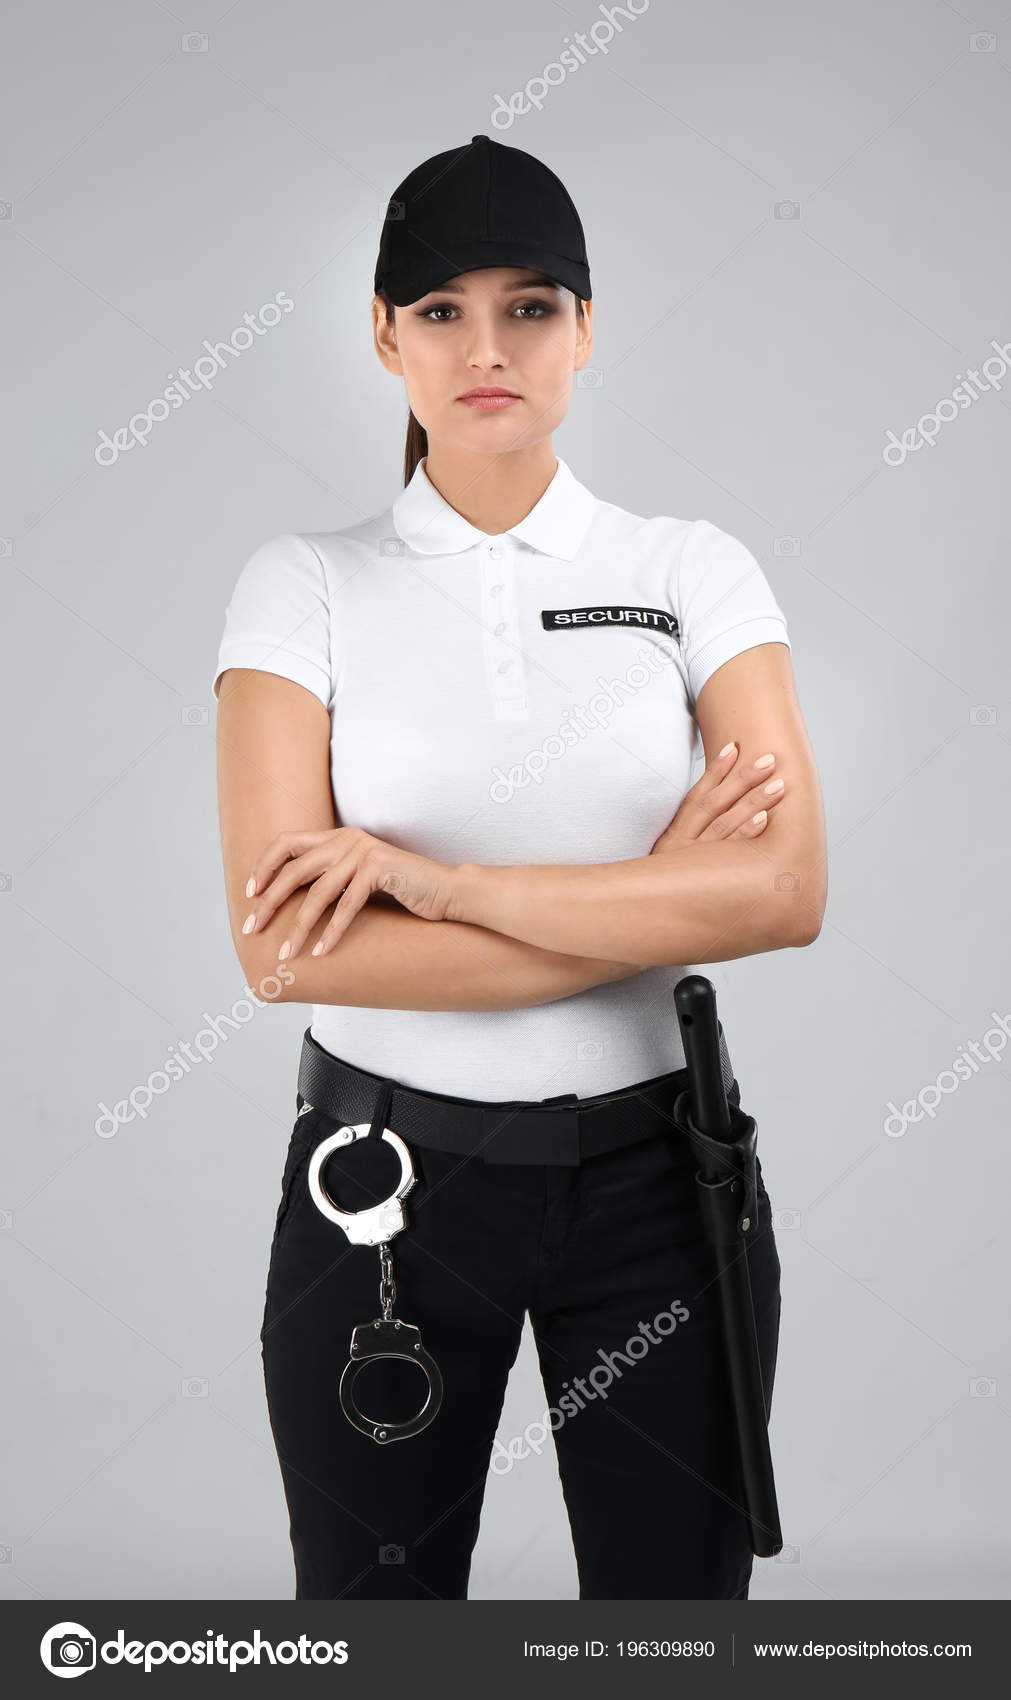 Female Security Guard Uniform Color Background Stock Photo By